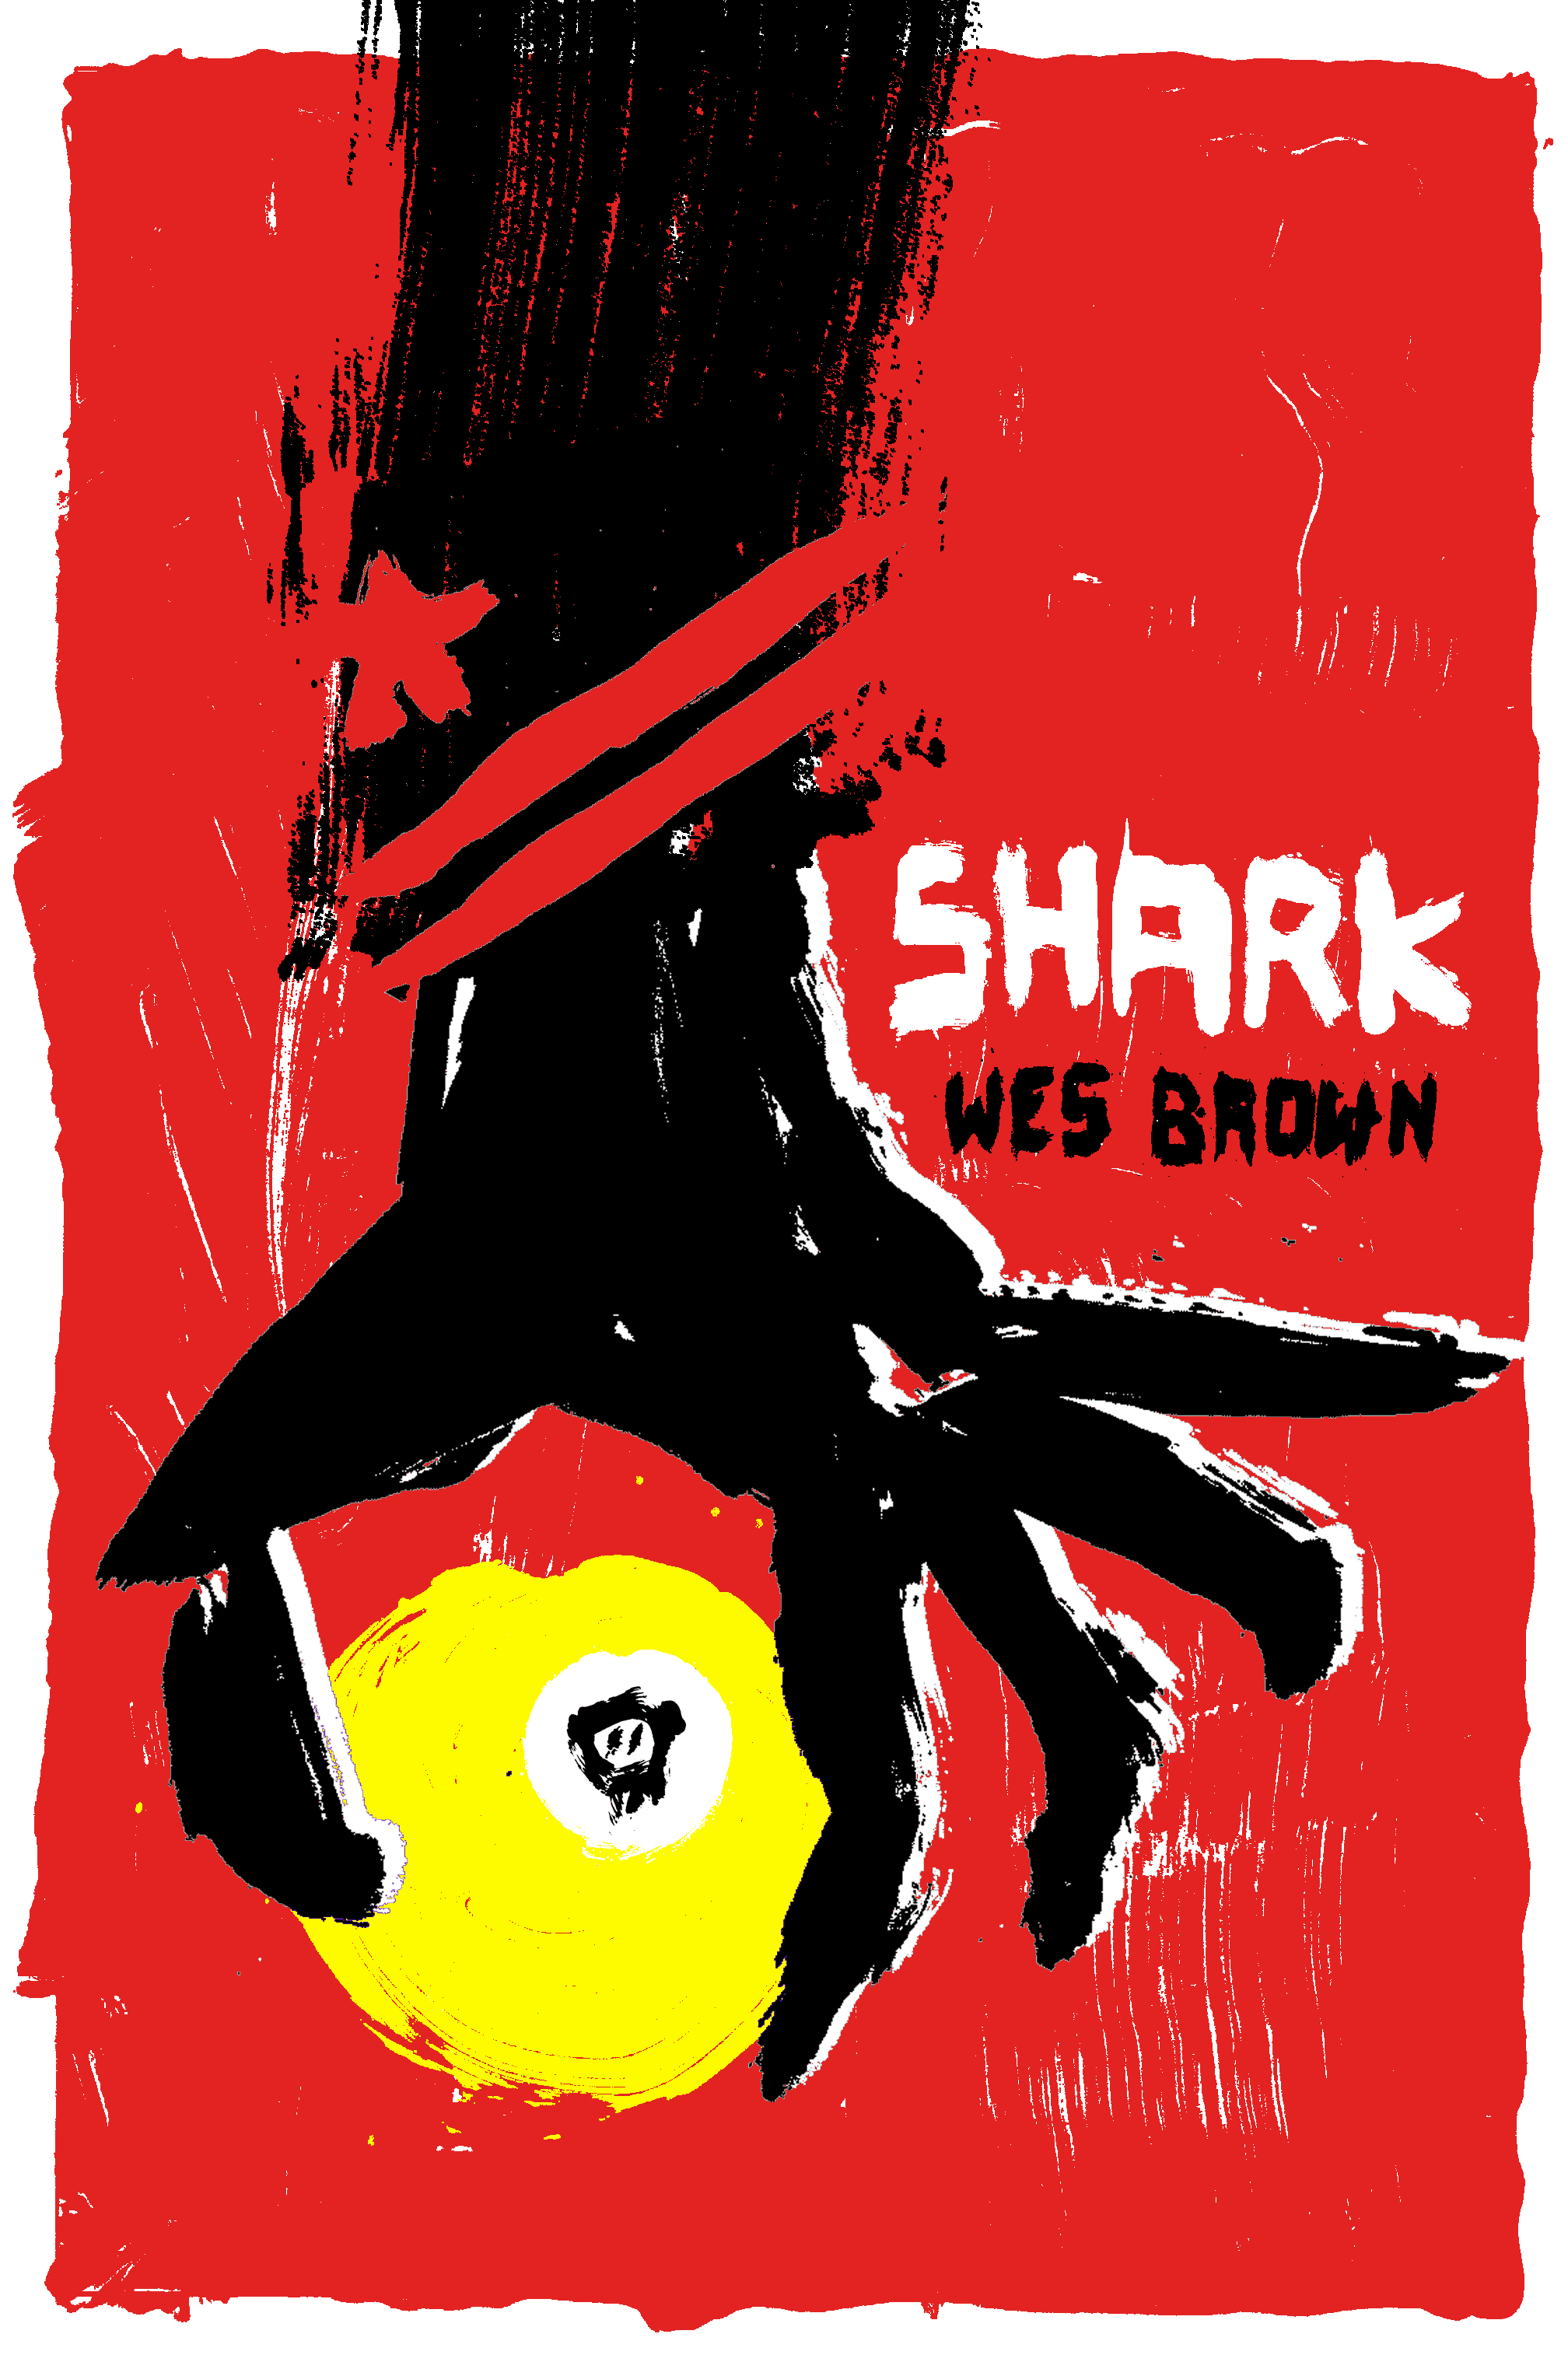 Shark by Wes Brown